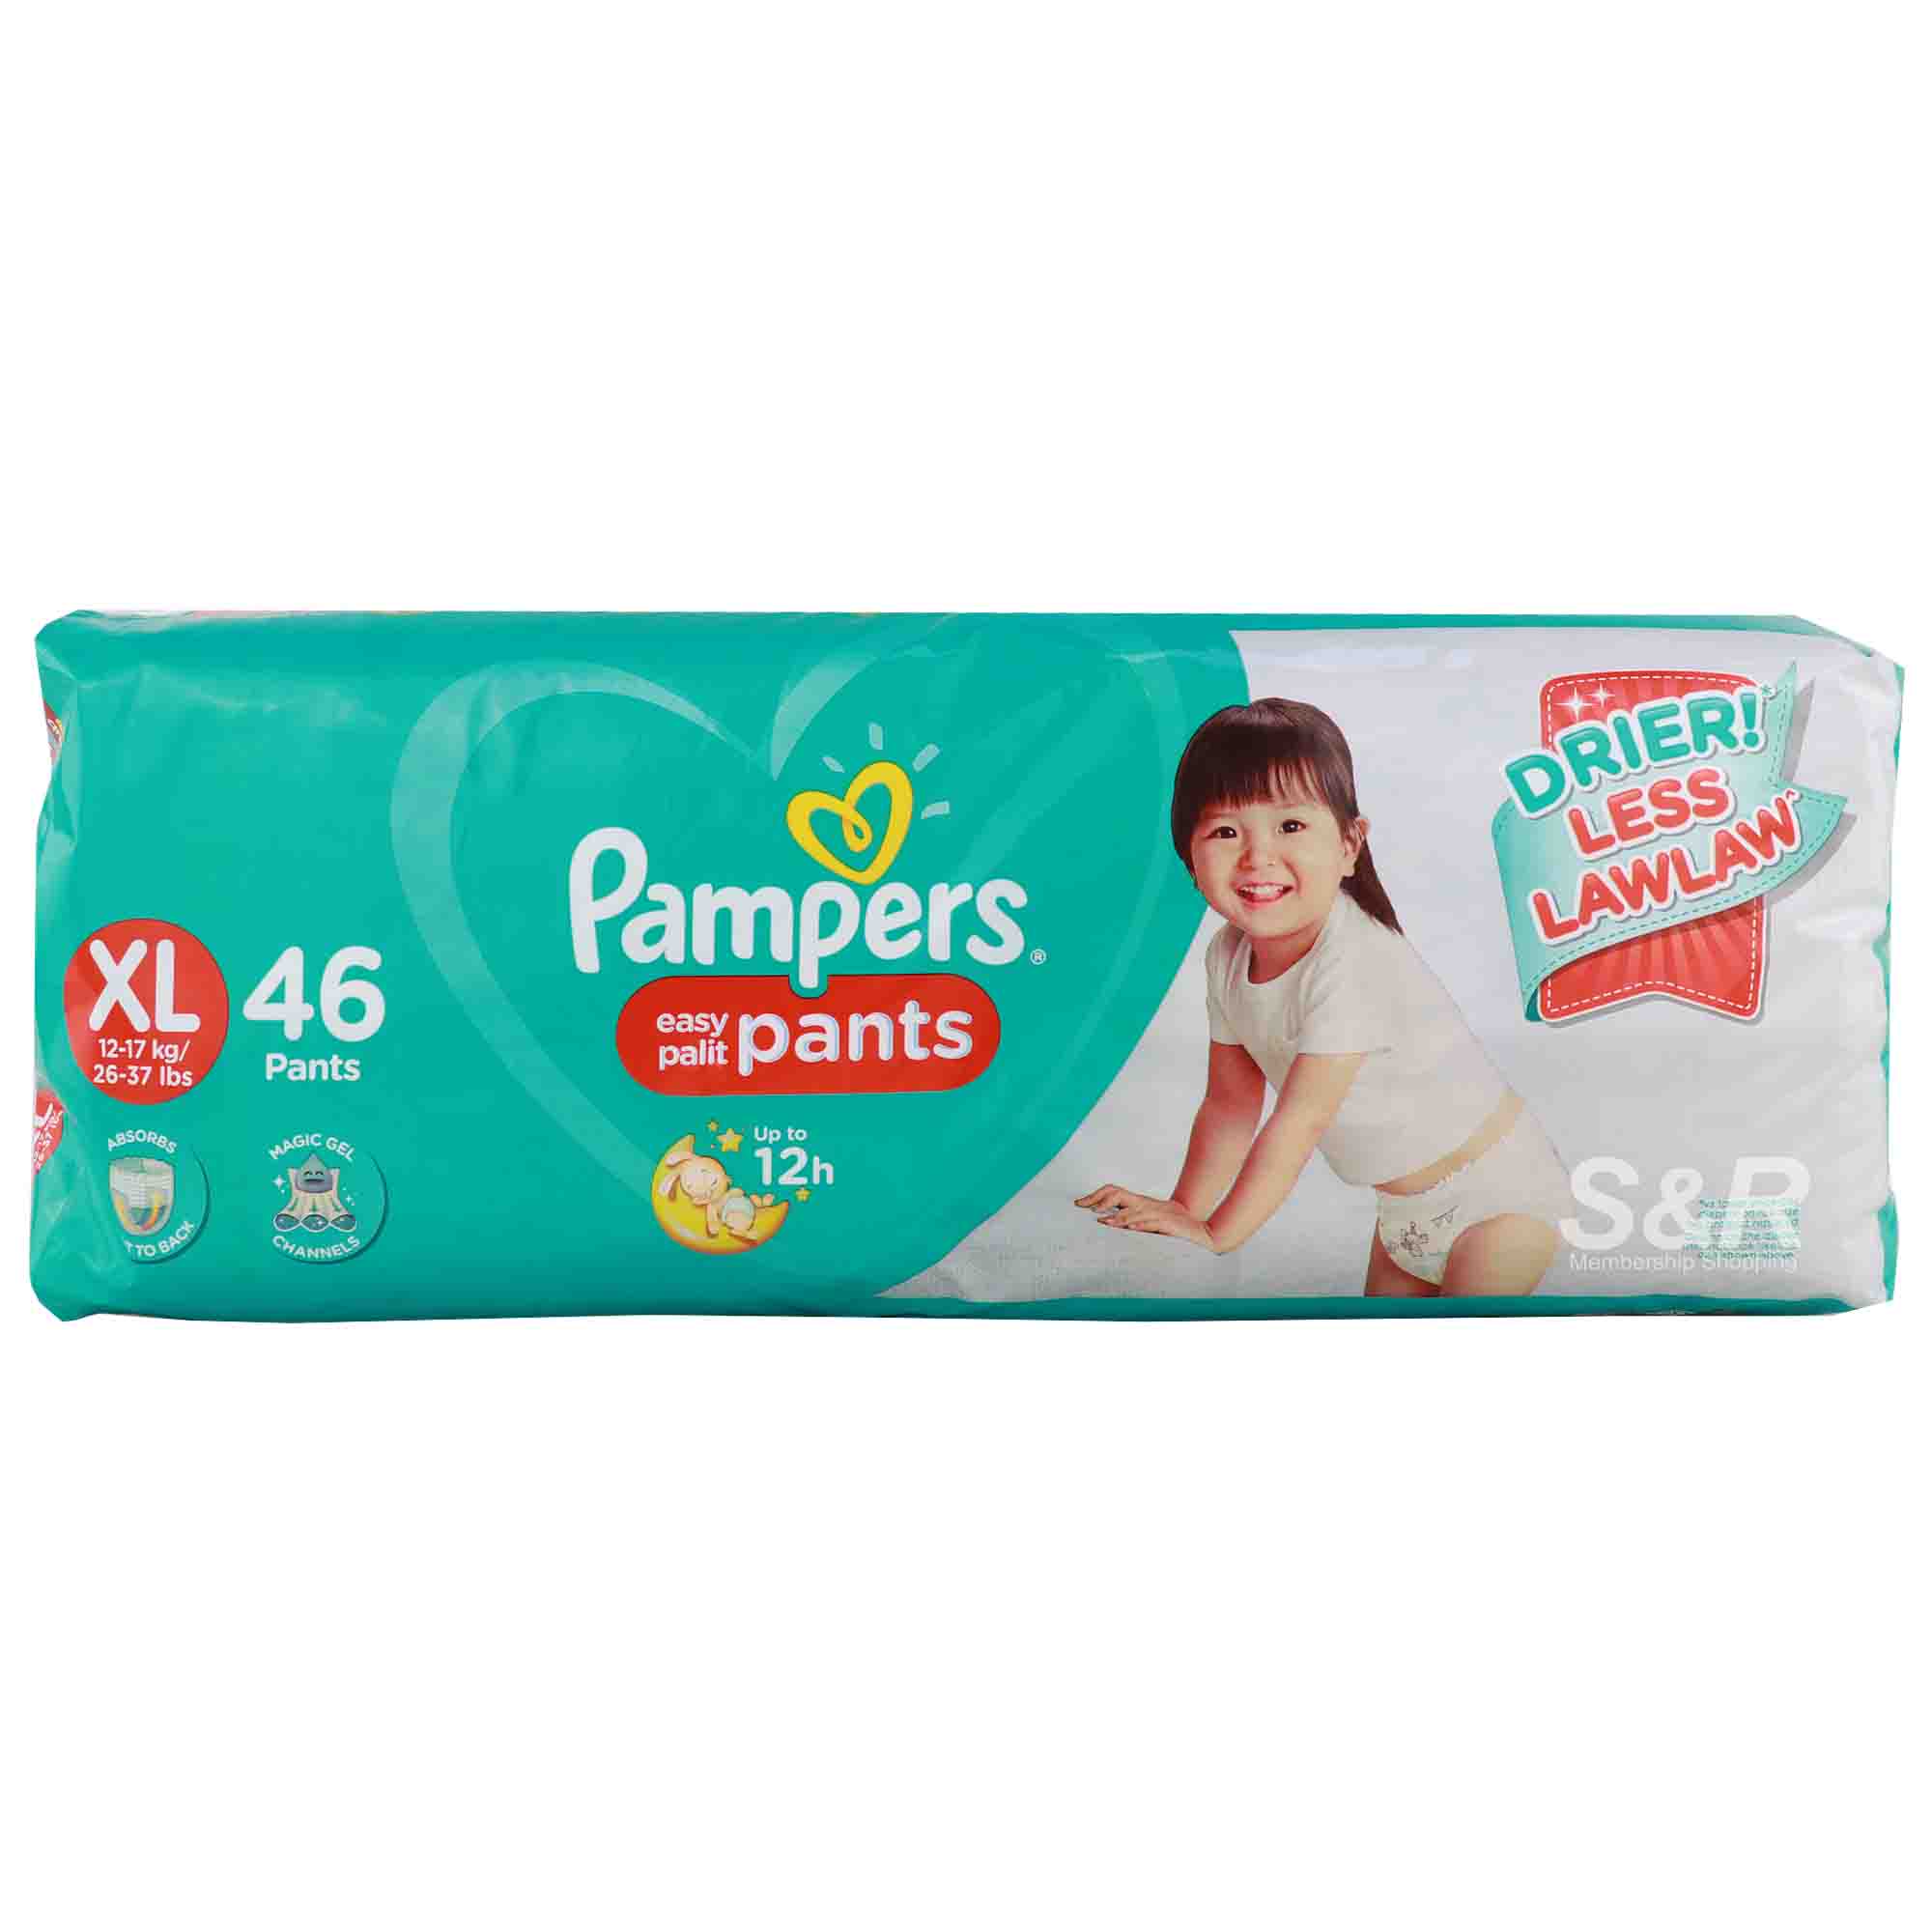 Pampers Baby Dry Pants XL 46pcs